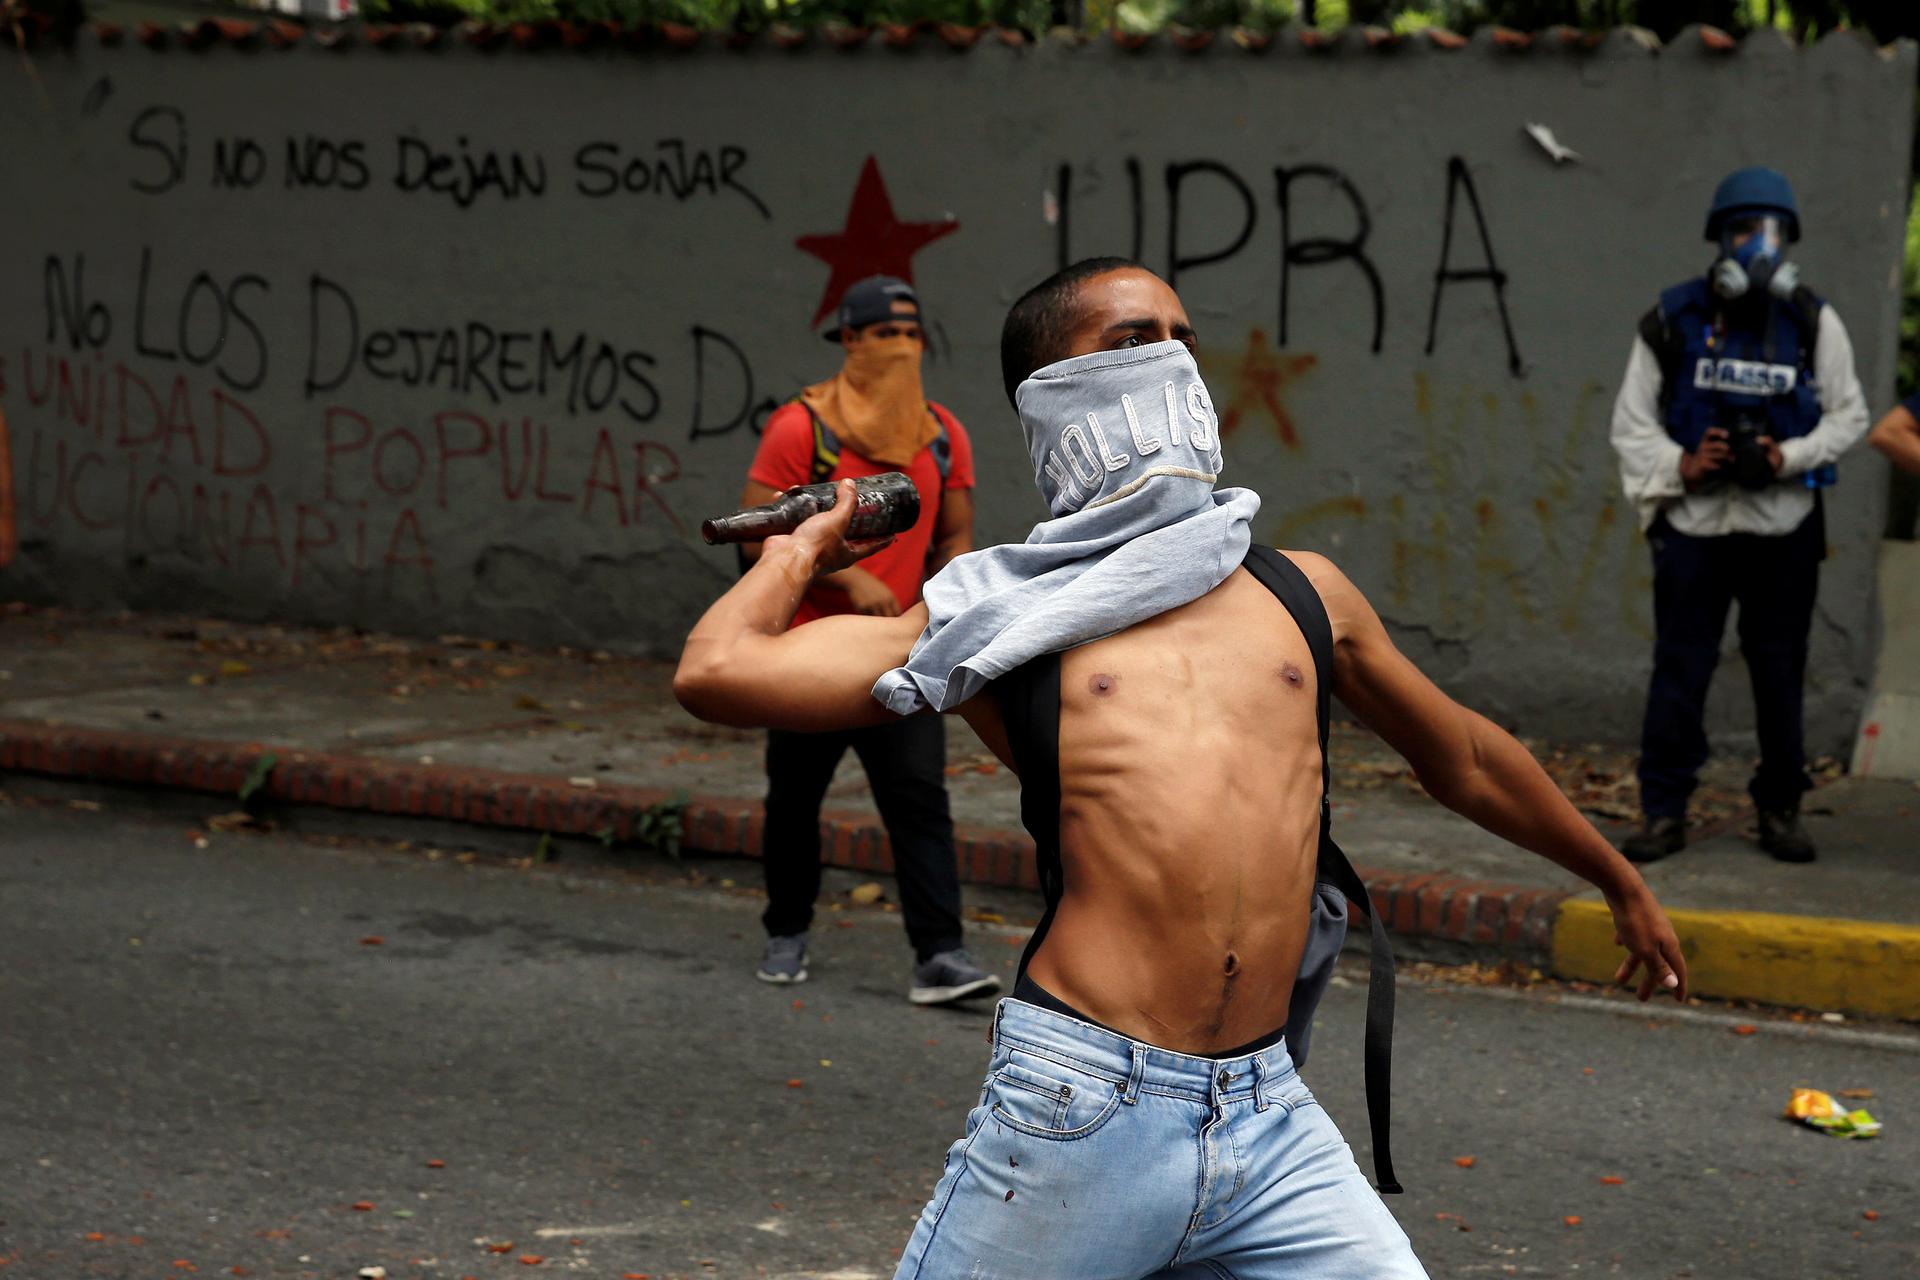 A demonstrator attempts to throw a bottle towards riot police officers during a protest called by university students against Venezuela's government in Caracas, Venezuela, June 9, 2016.